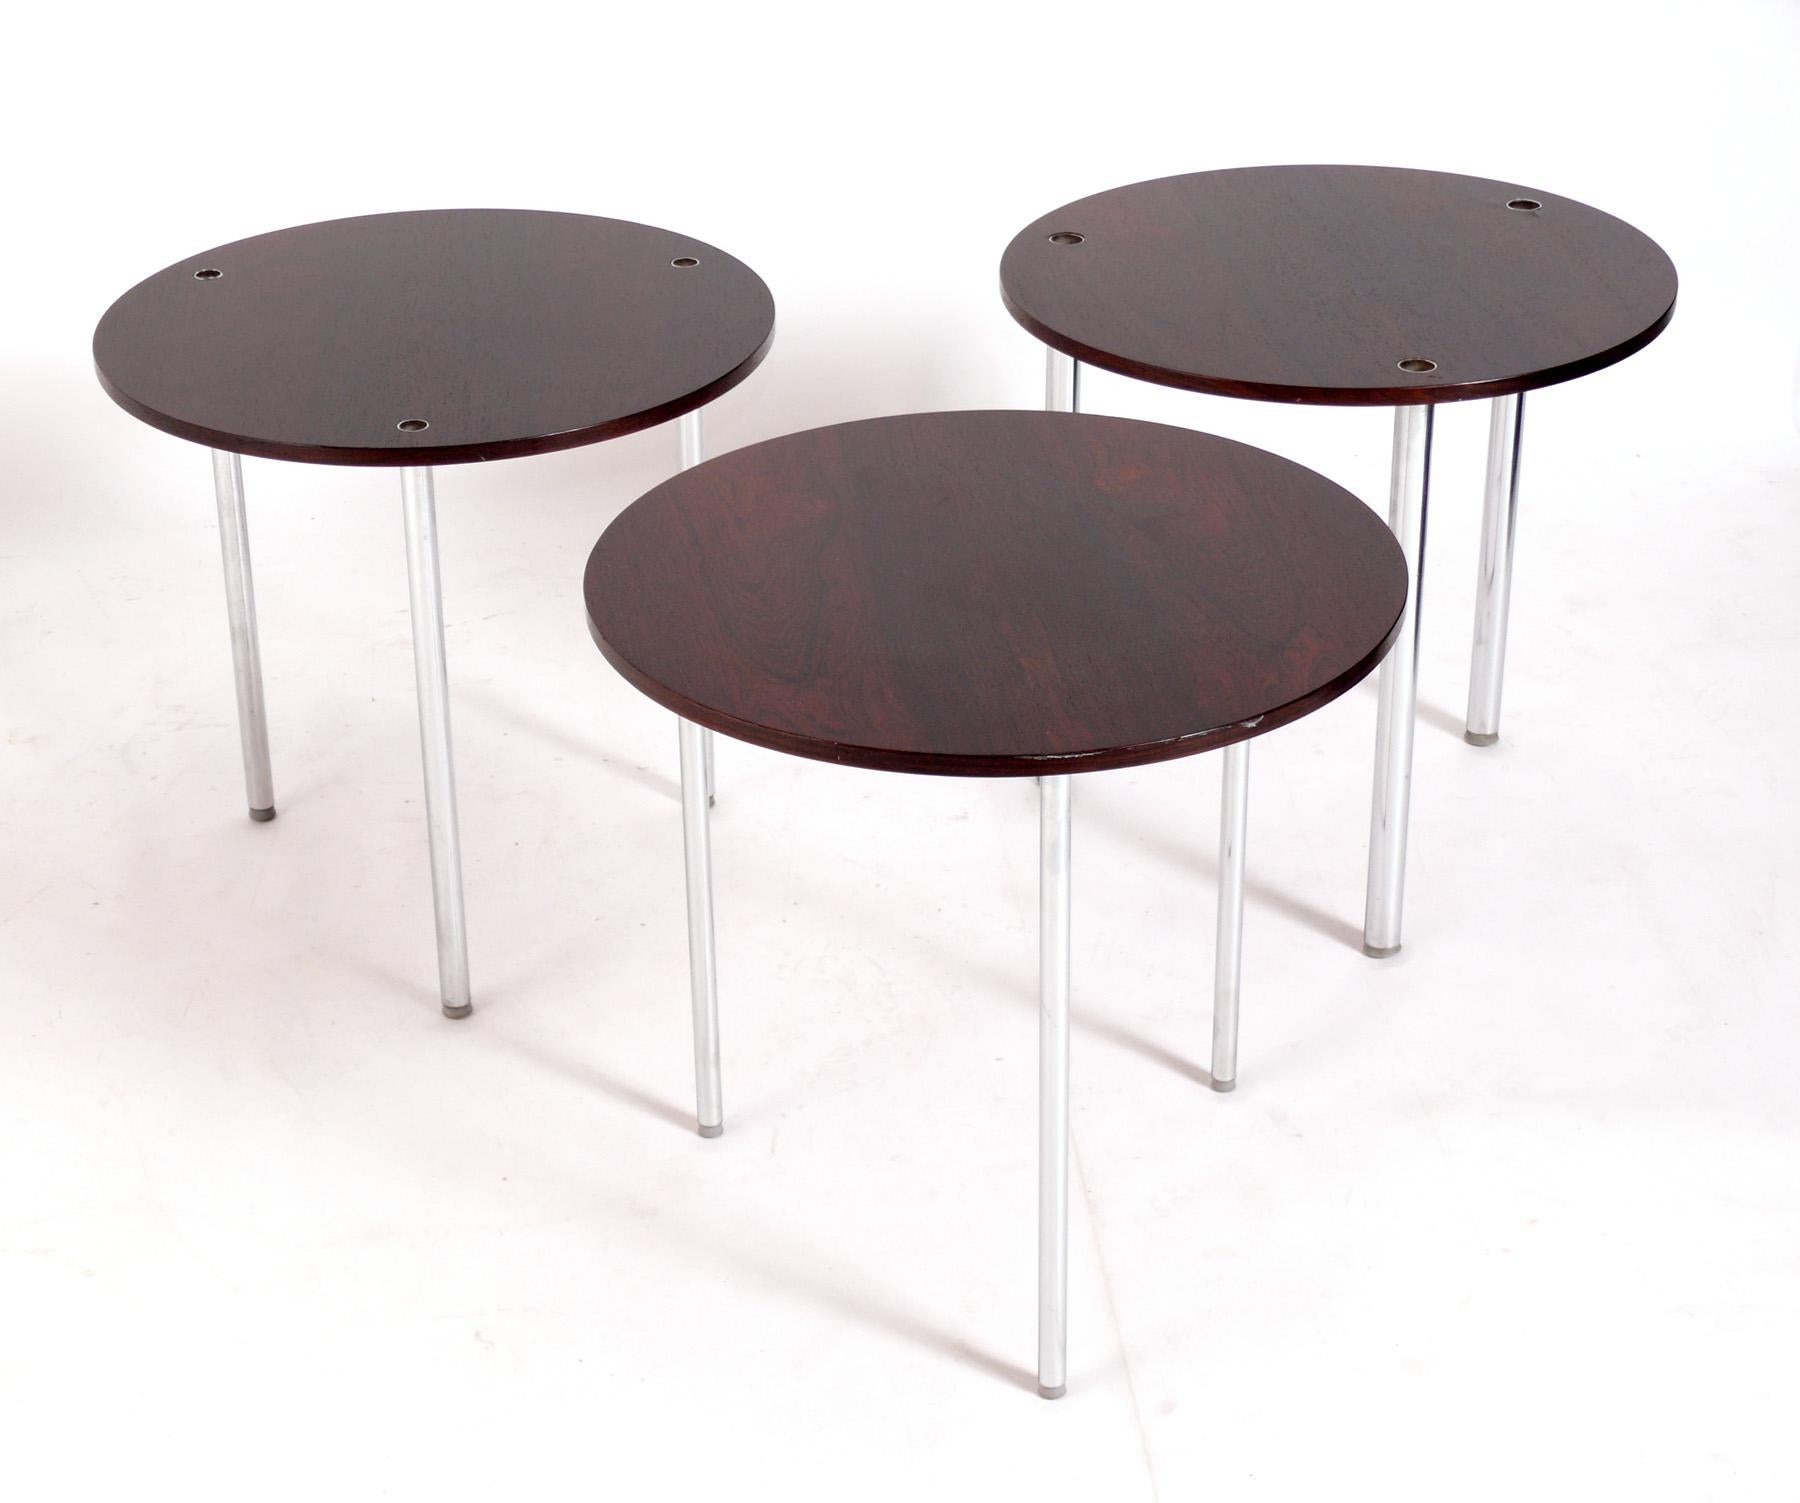 Mid-20th Century Danish Modern Rosewood Stacking Tables by Poul Norreklit   For Sale